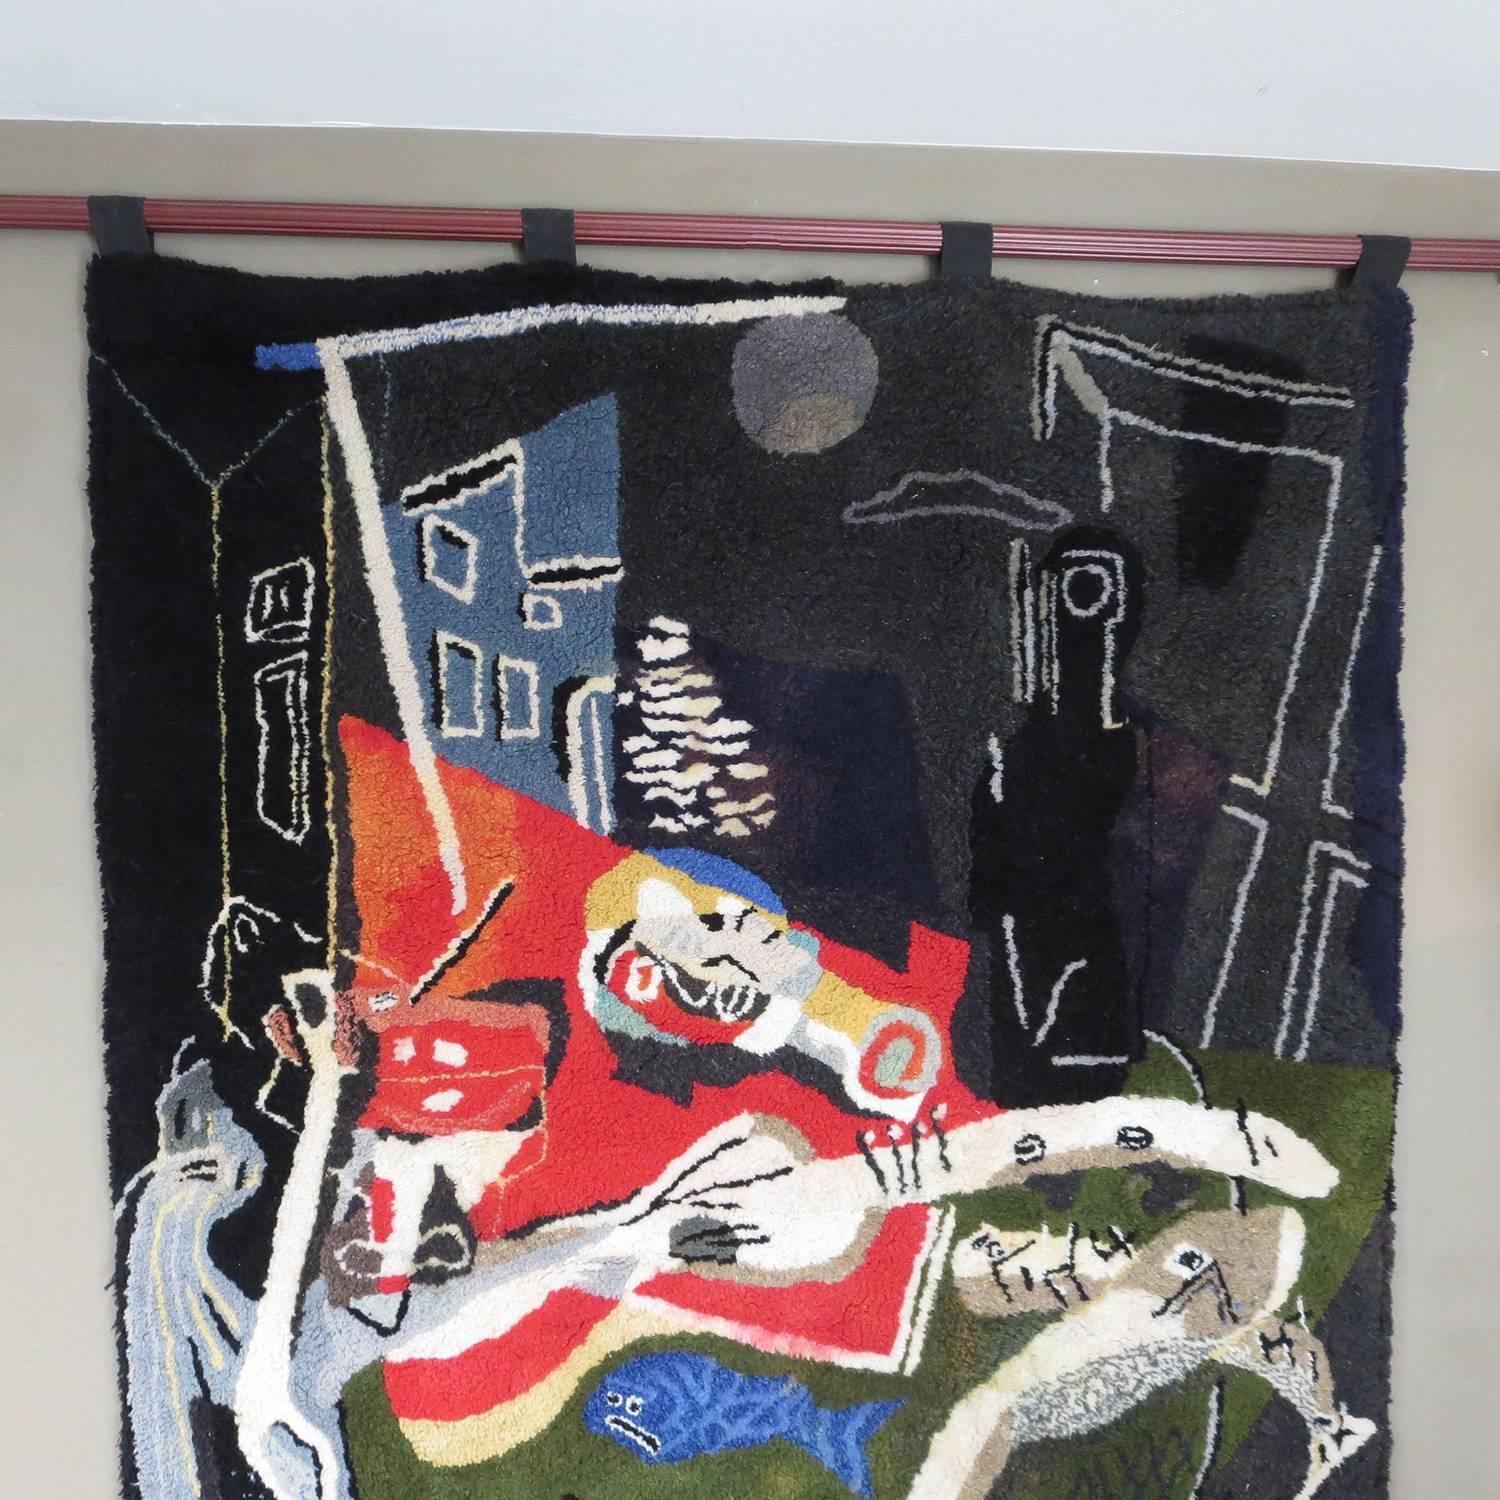 Salvador Dali (Spanish 1904-1989) will certainly be remembered as the father of Surrealism in the art world. His distorted shapes challenged the viewer and changed the face of art forever. This woven rug like tapestry was taken from an earlier work